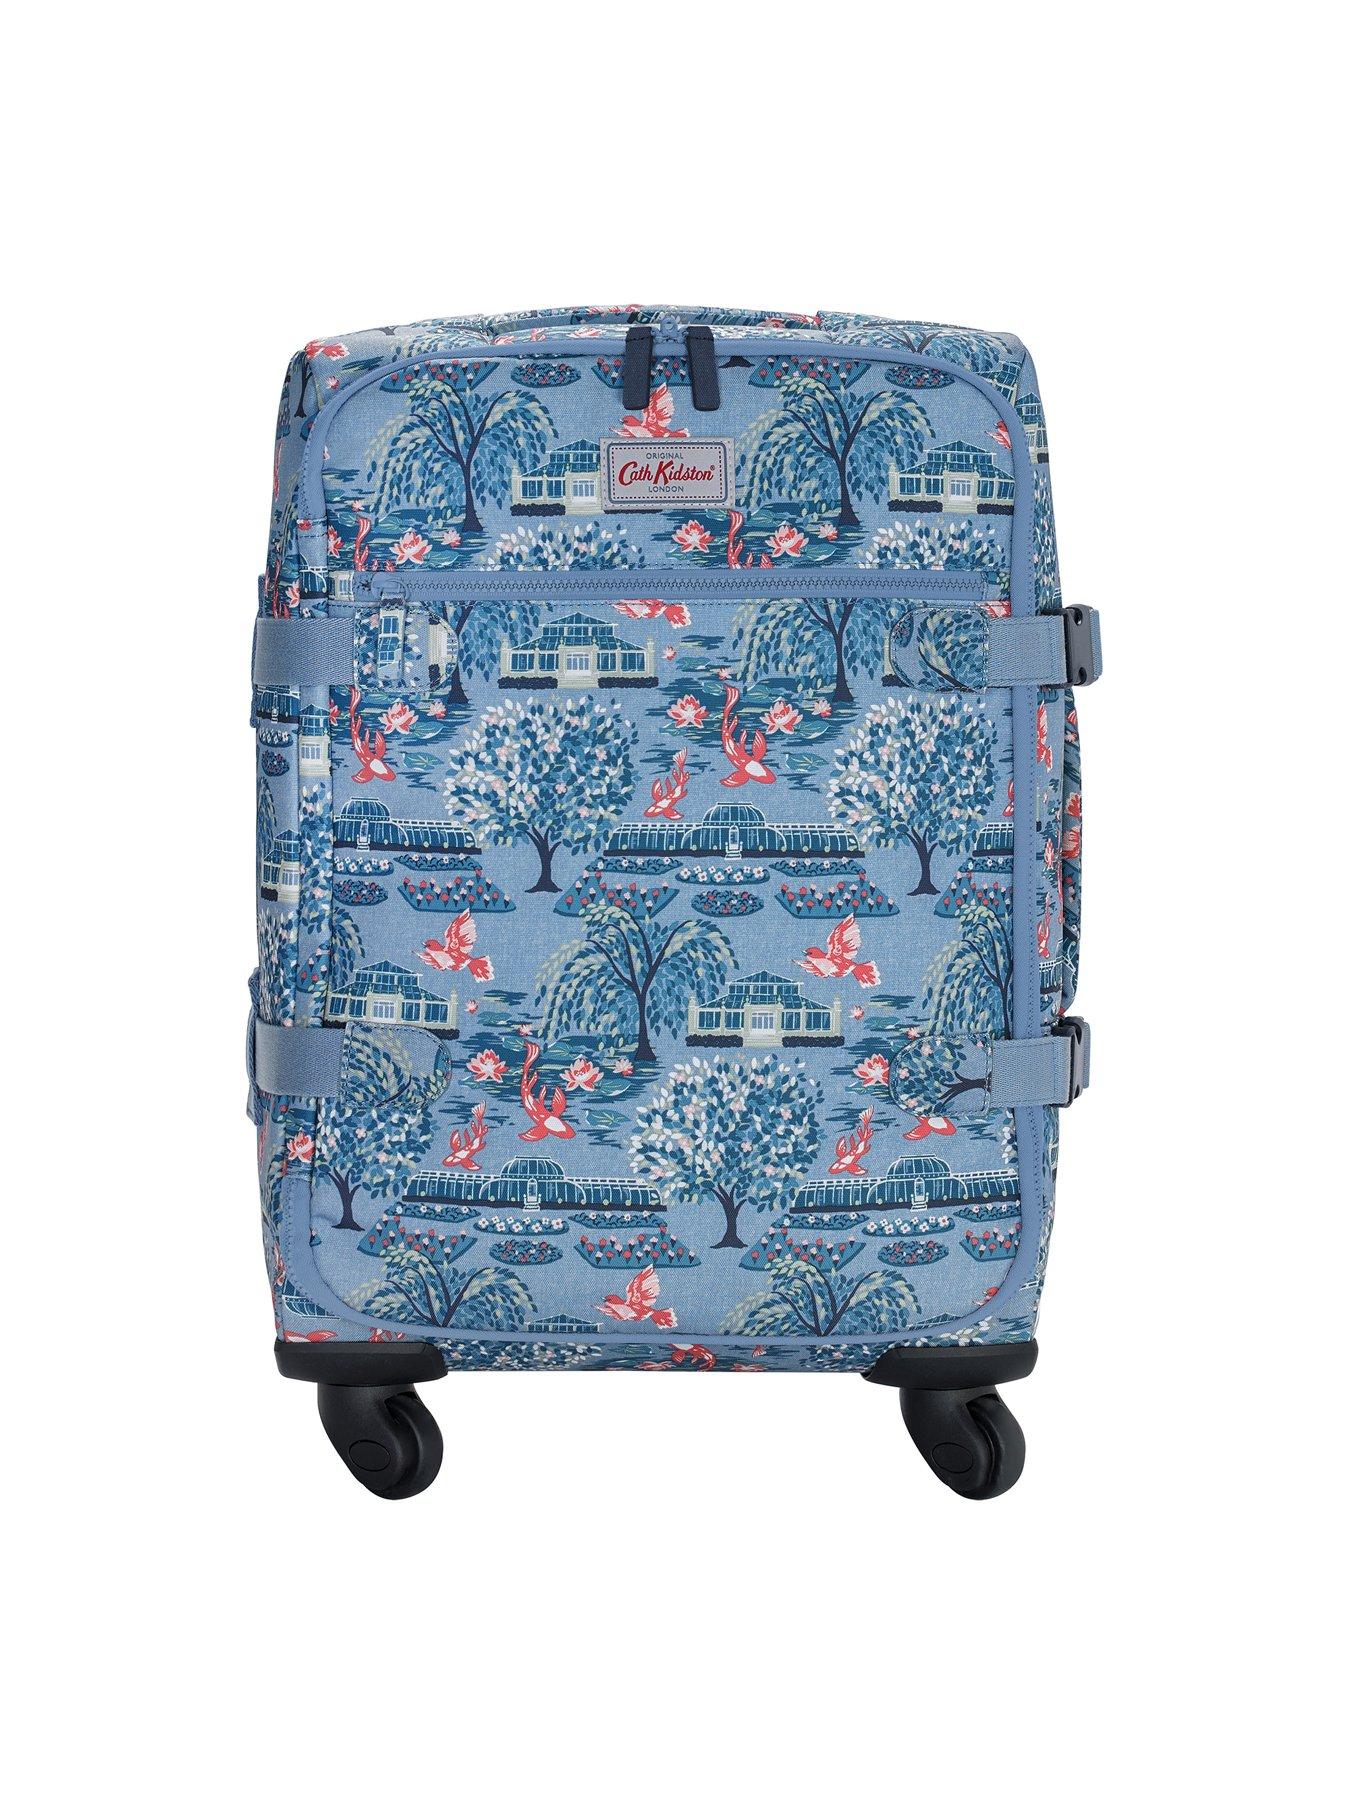 cath kidston mother and baby travel bag